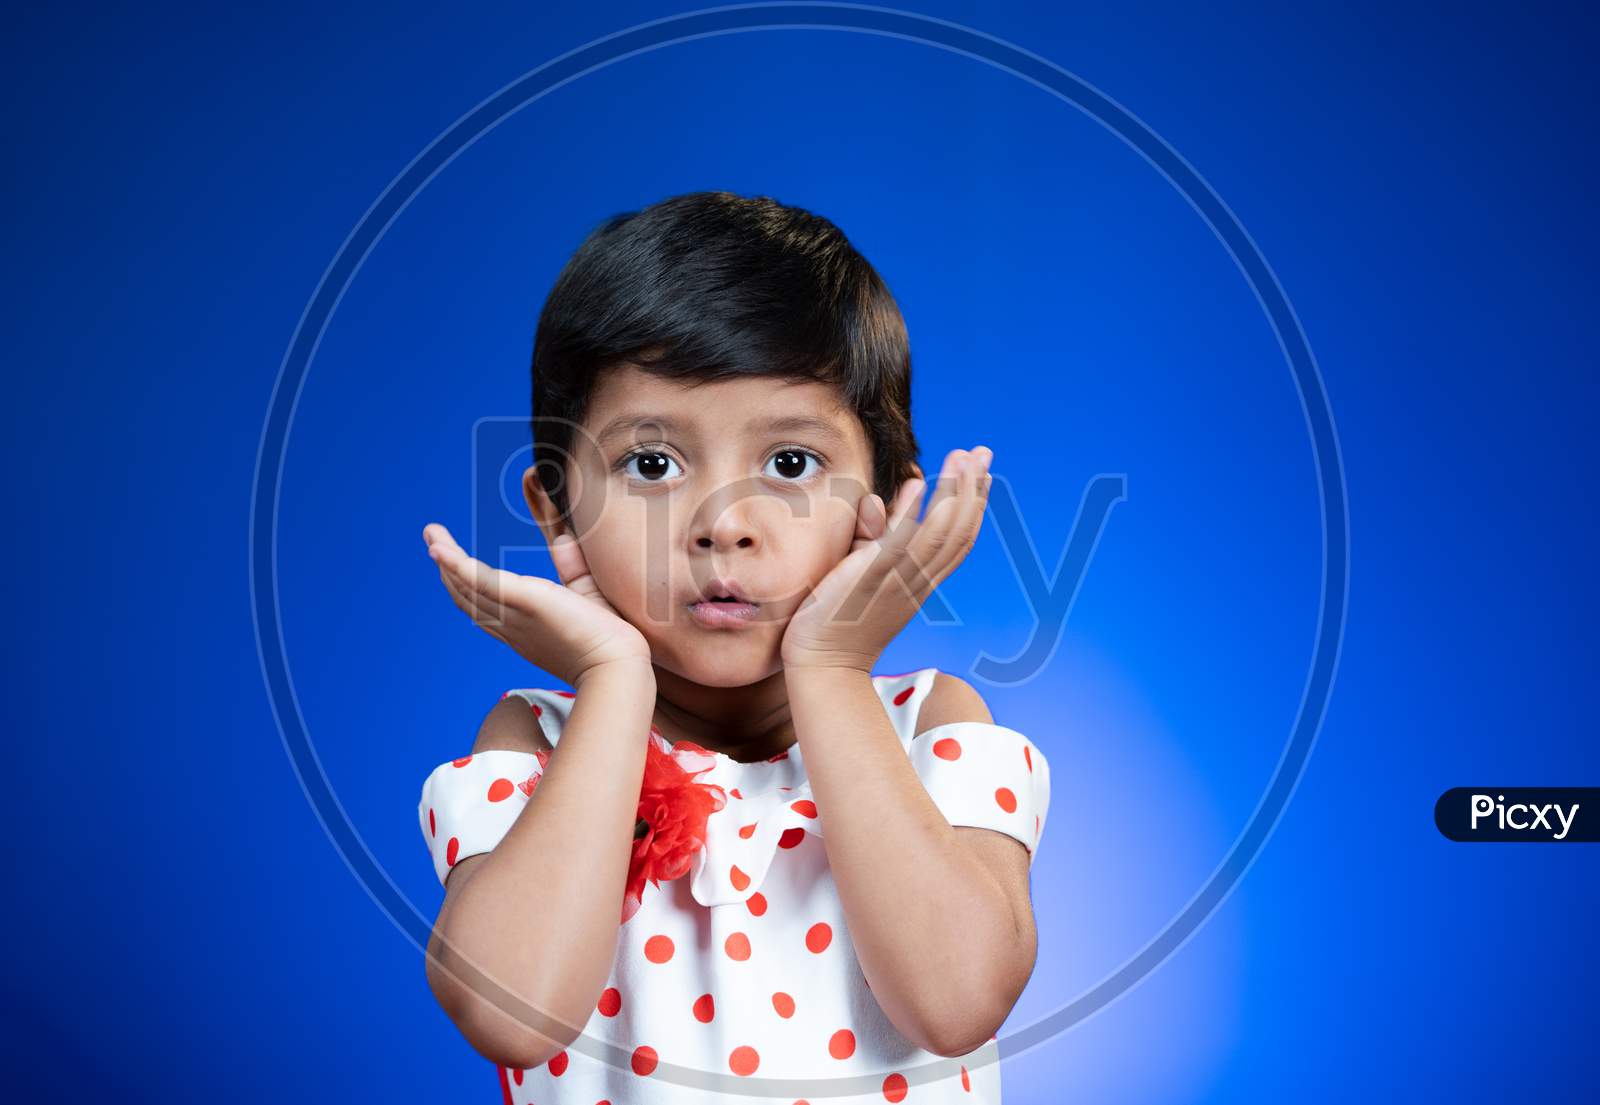 Cute Surprised Girl Kid Saying Wow By Closing Mouth With Hands And Looking At Camera On Blue Background - Concept Of Crazy Deal Or Offers.